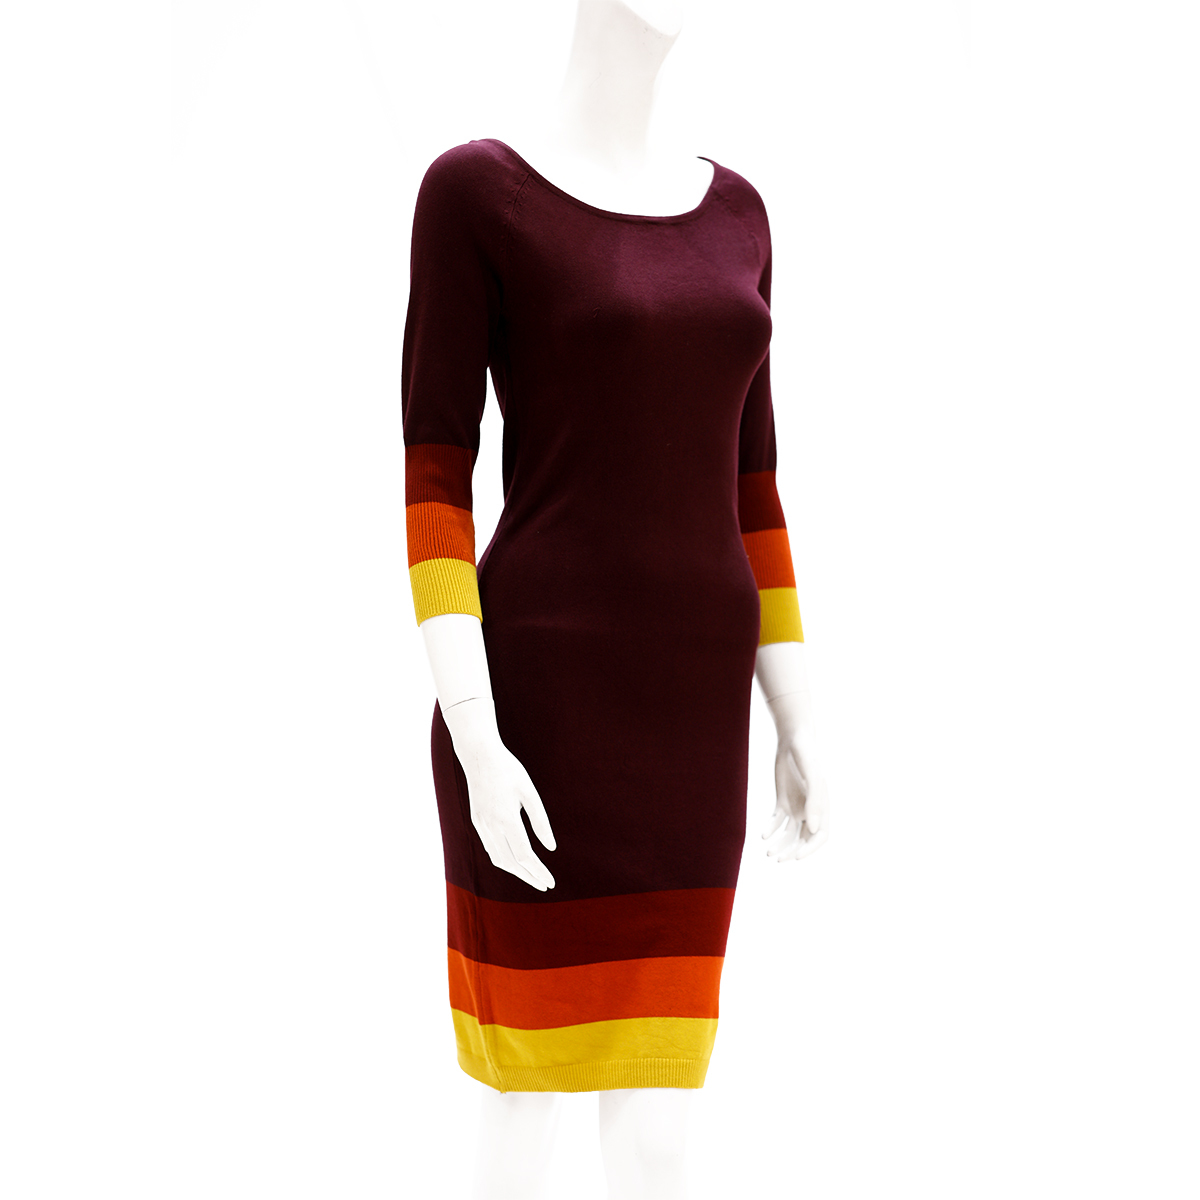 Sculler For Her Solid Sheath Knit Dress-Burgundy